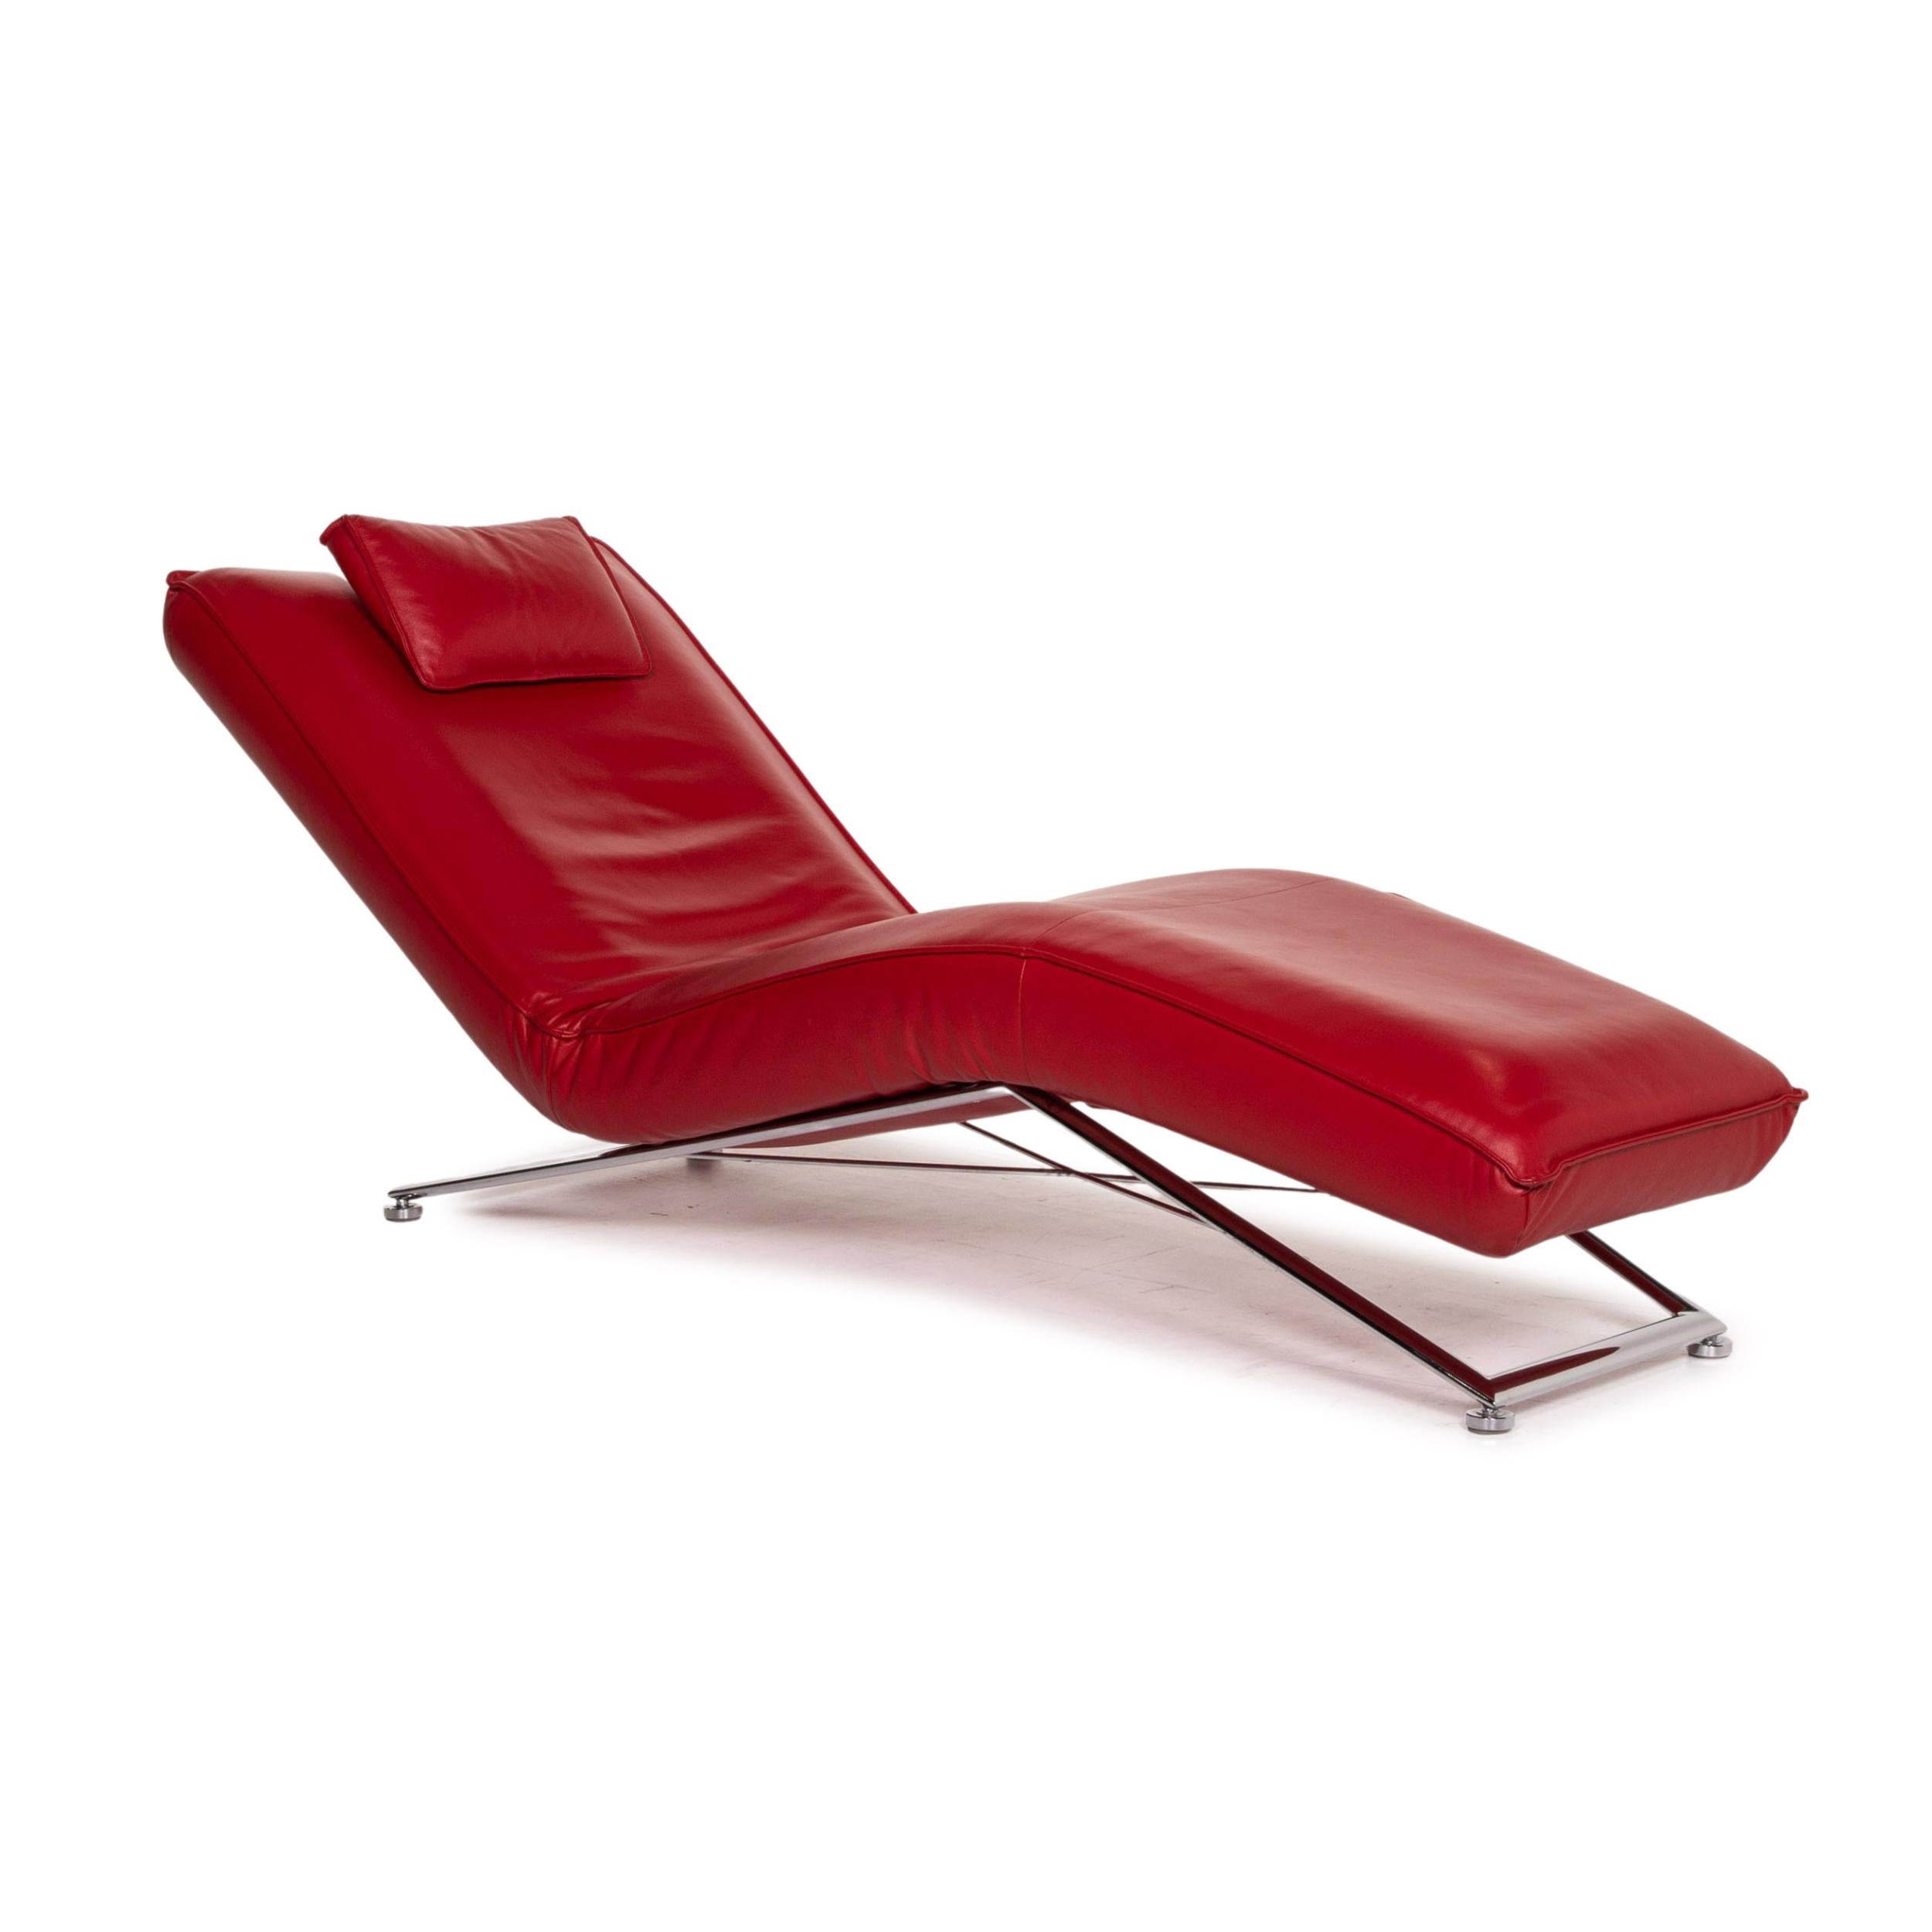 Modern KoinorJeremiah Leather Lounger Red Relaxation Function Relaxation Lounger